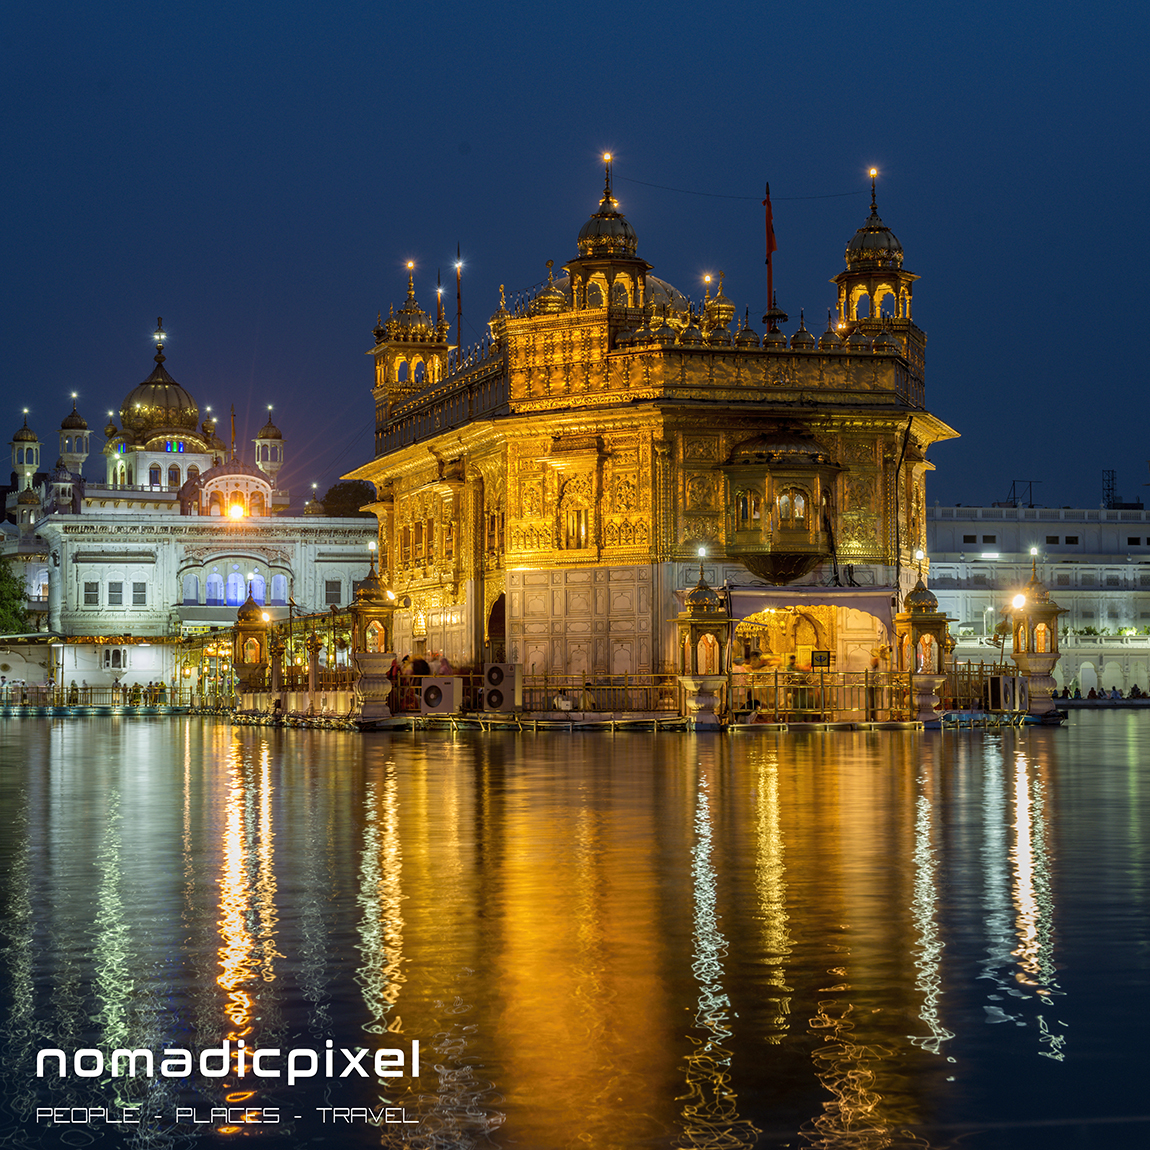 Photographing the Golden Temple in Amritsar | Nomadicpixel